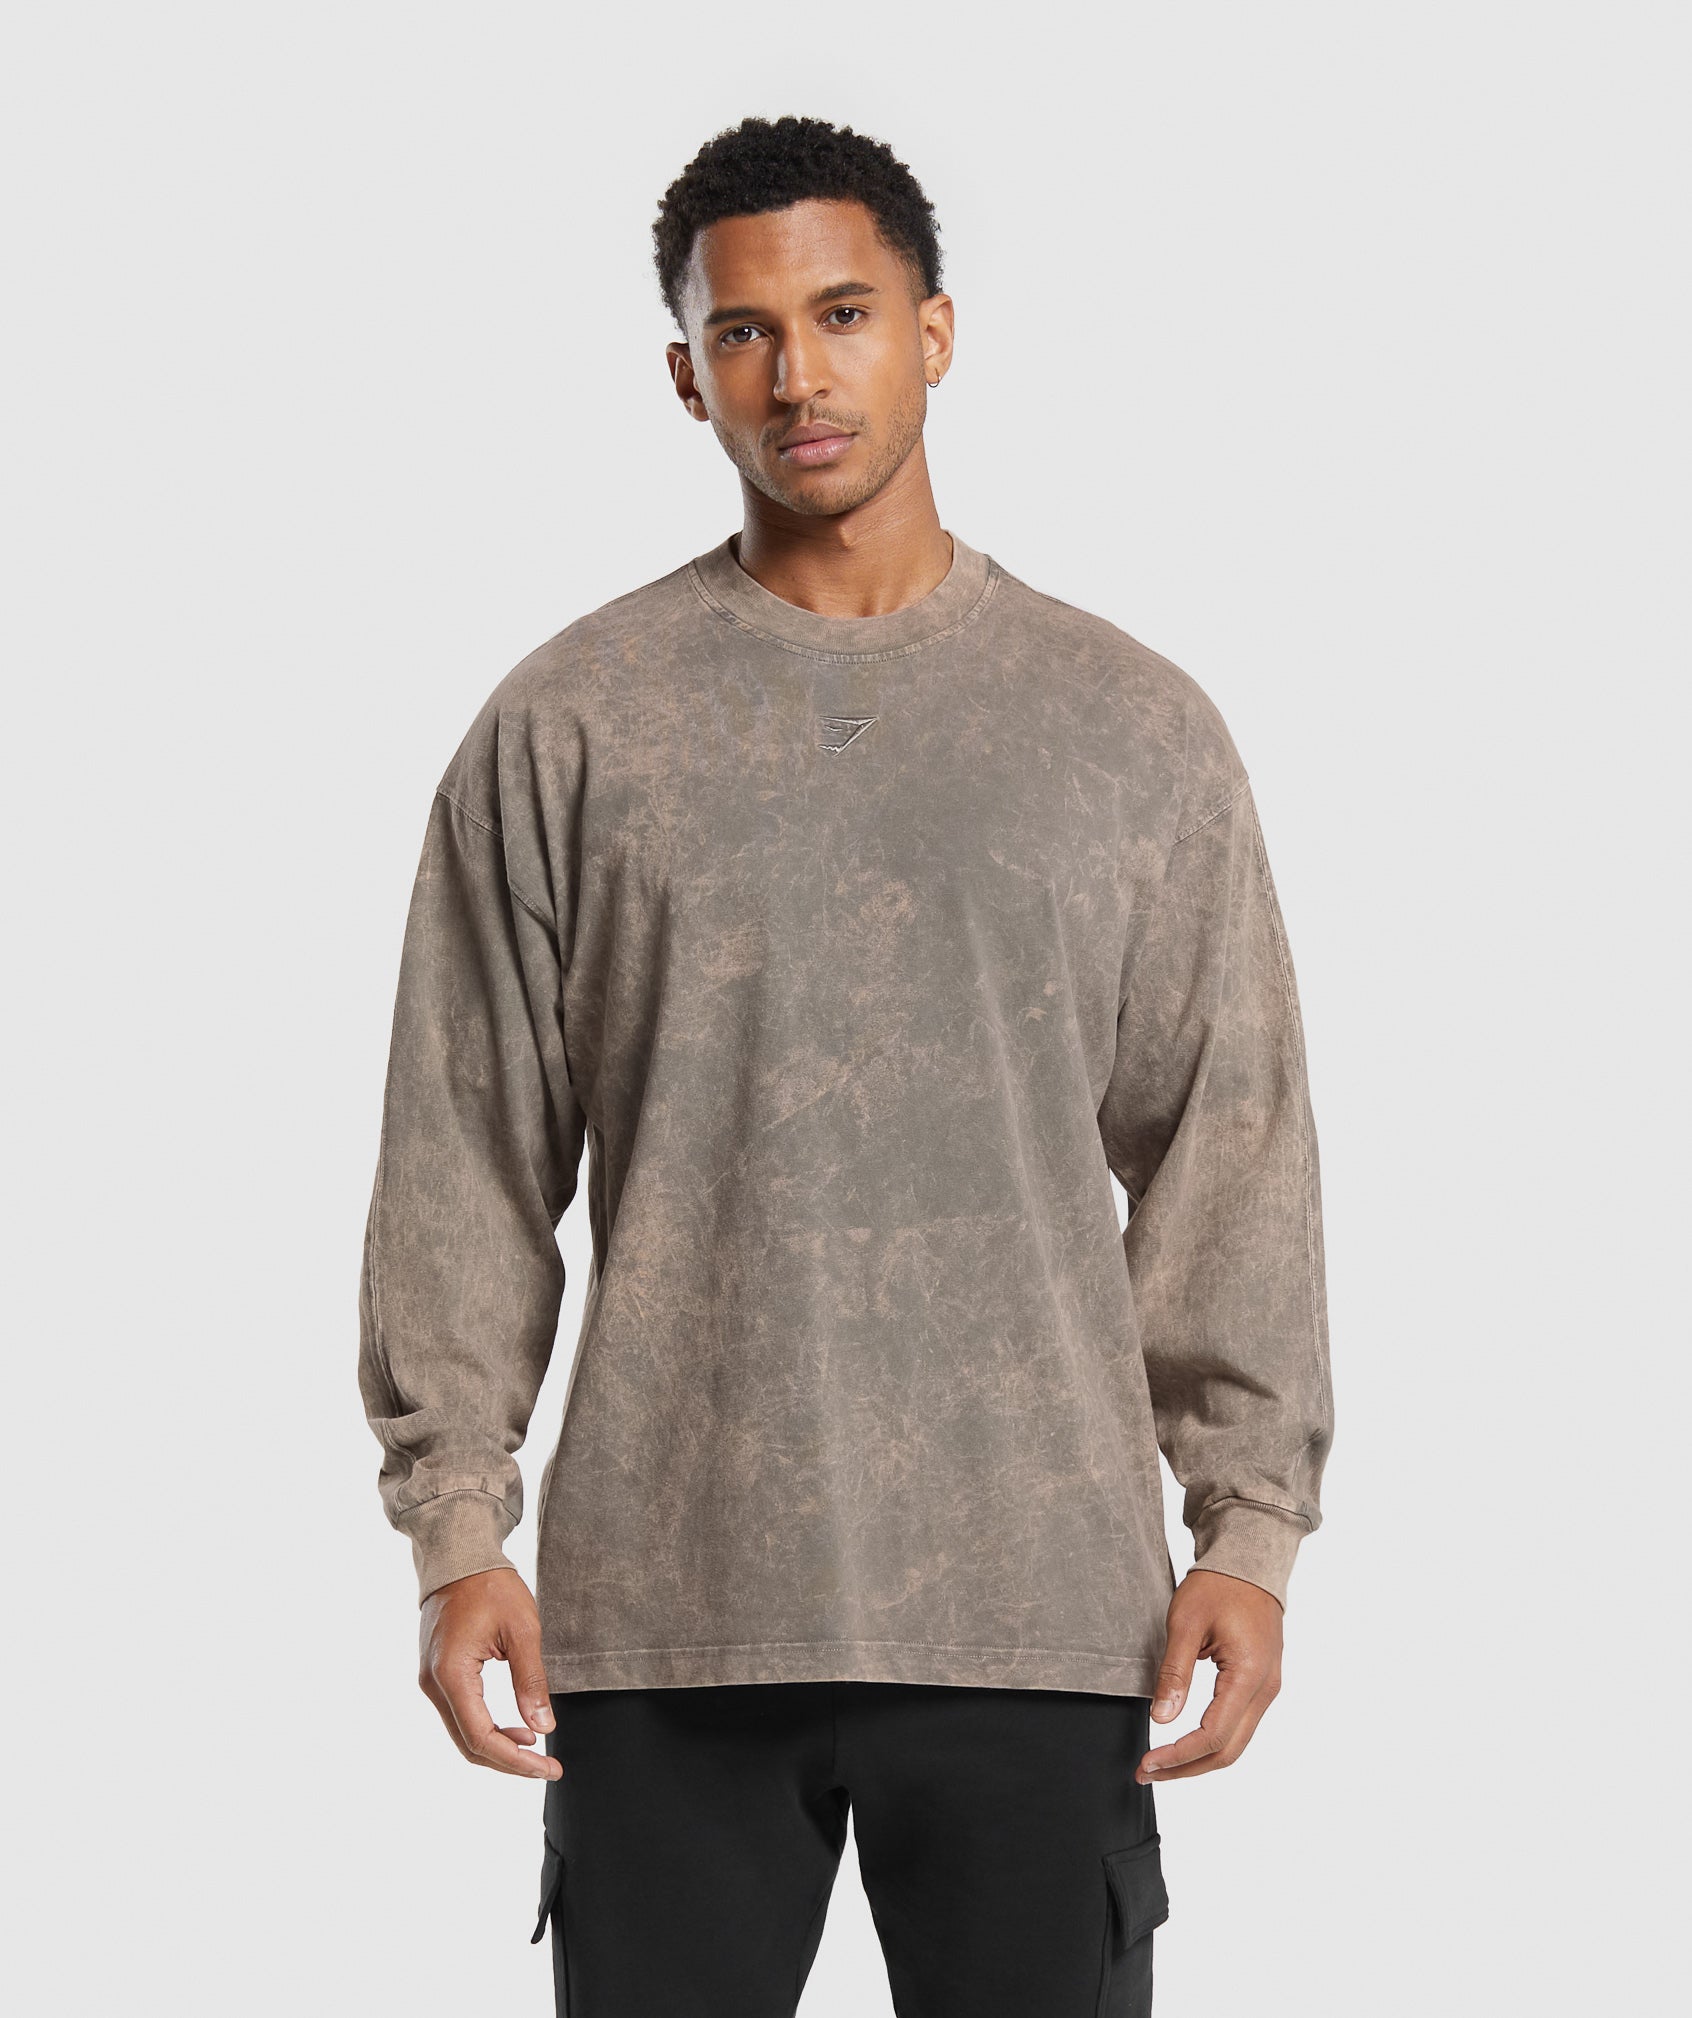 Rest Day Washed Long Sleeve T-Shirt in Linen Brown